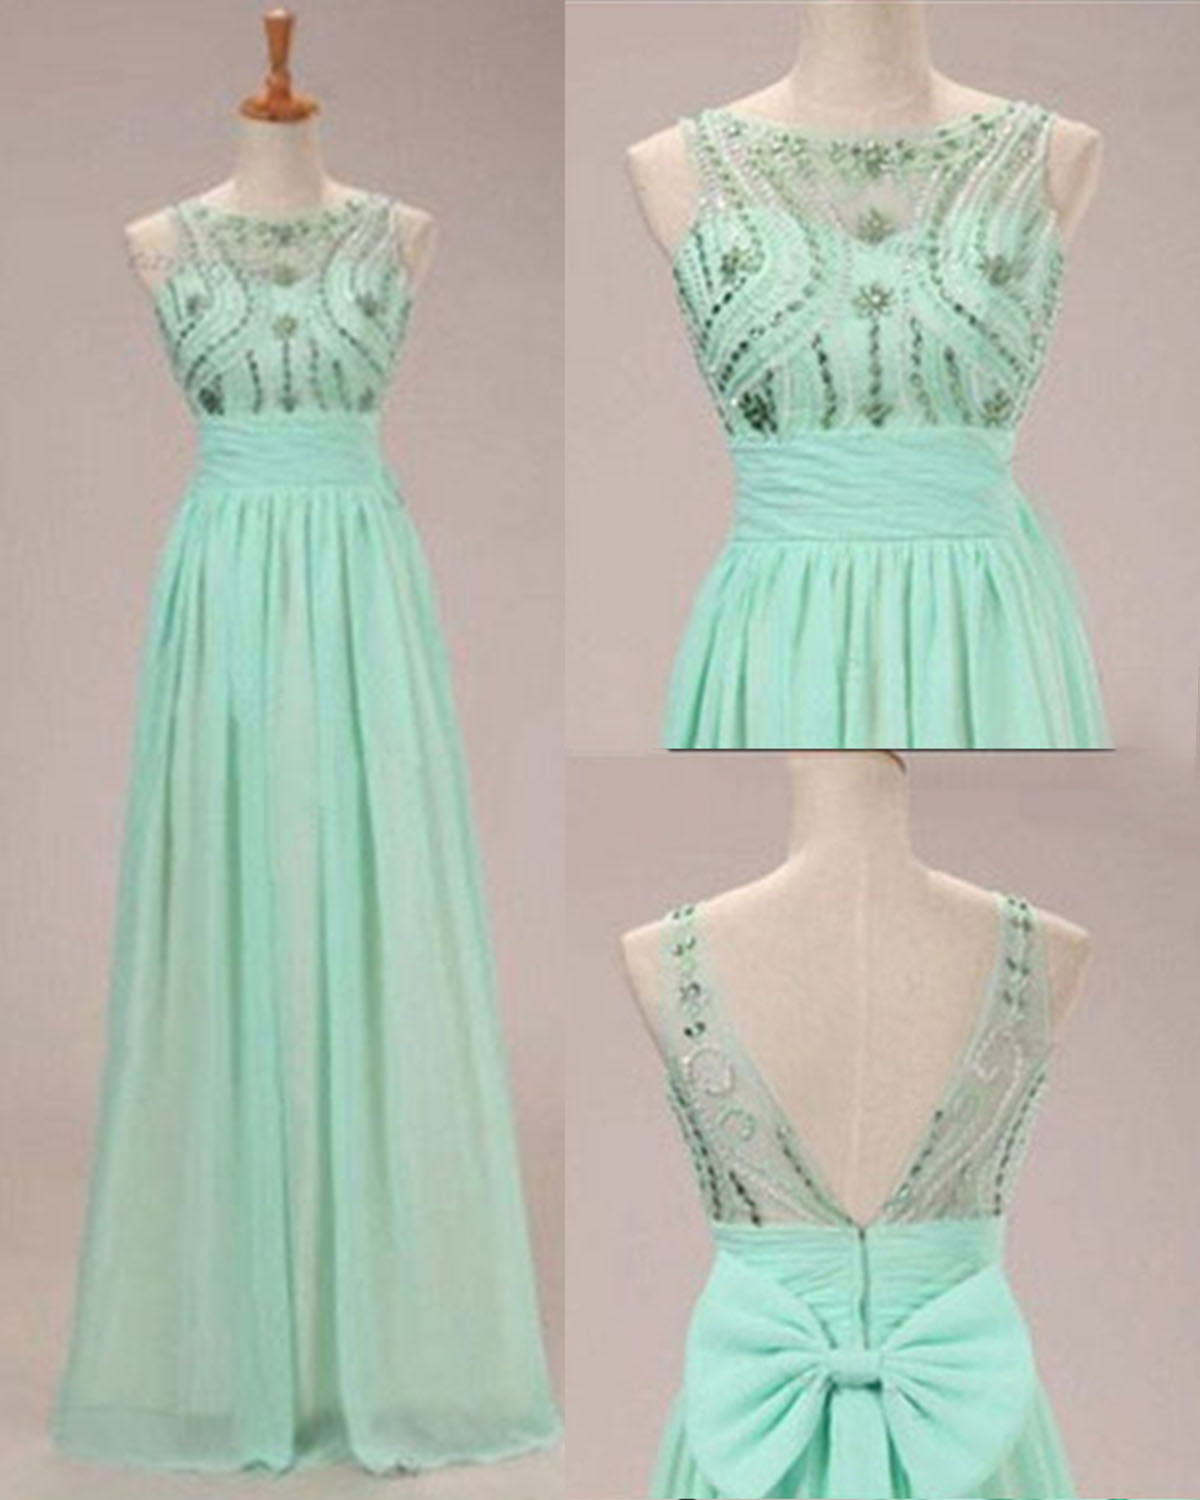 Cute Mint Green Chiffon Beaded O-neck Long Handmade Senior Prom Dress With Sequins, 2017 Homecoming Dress With Bowknot